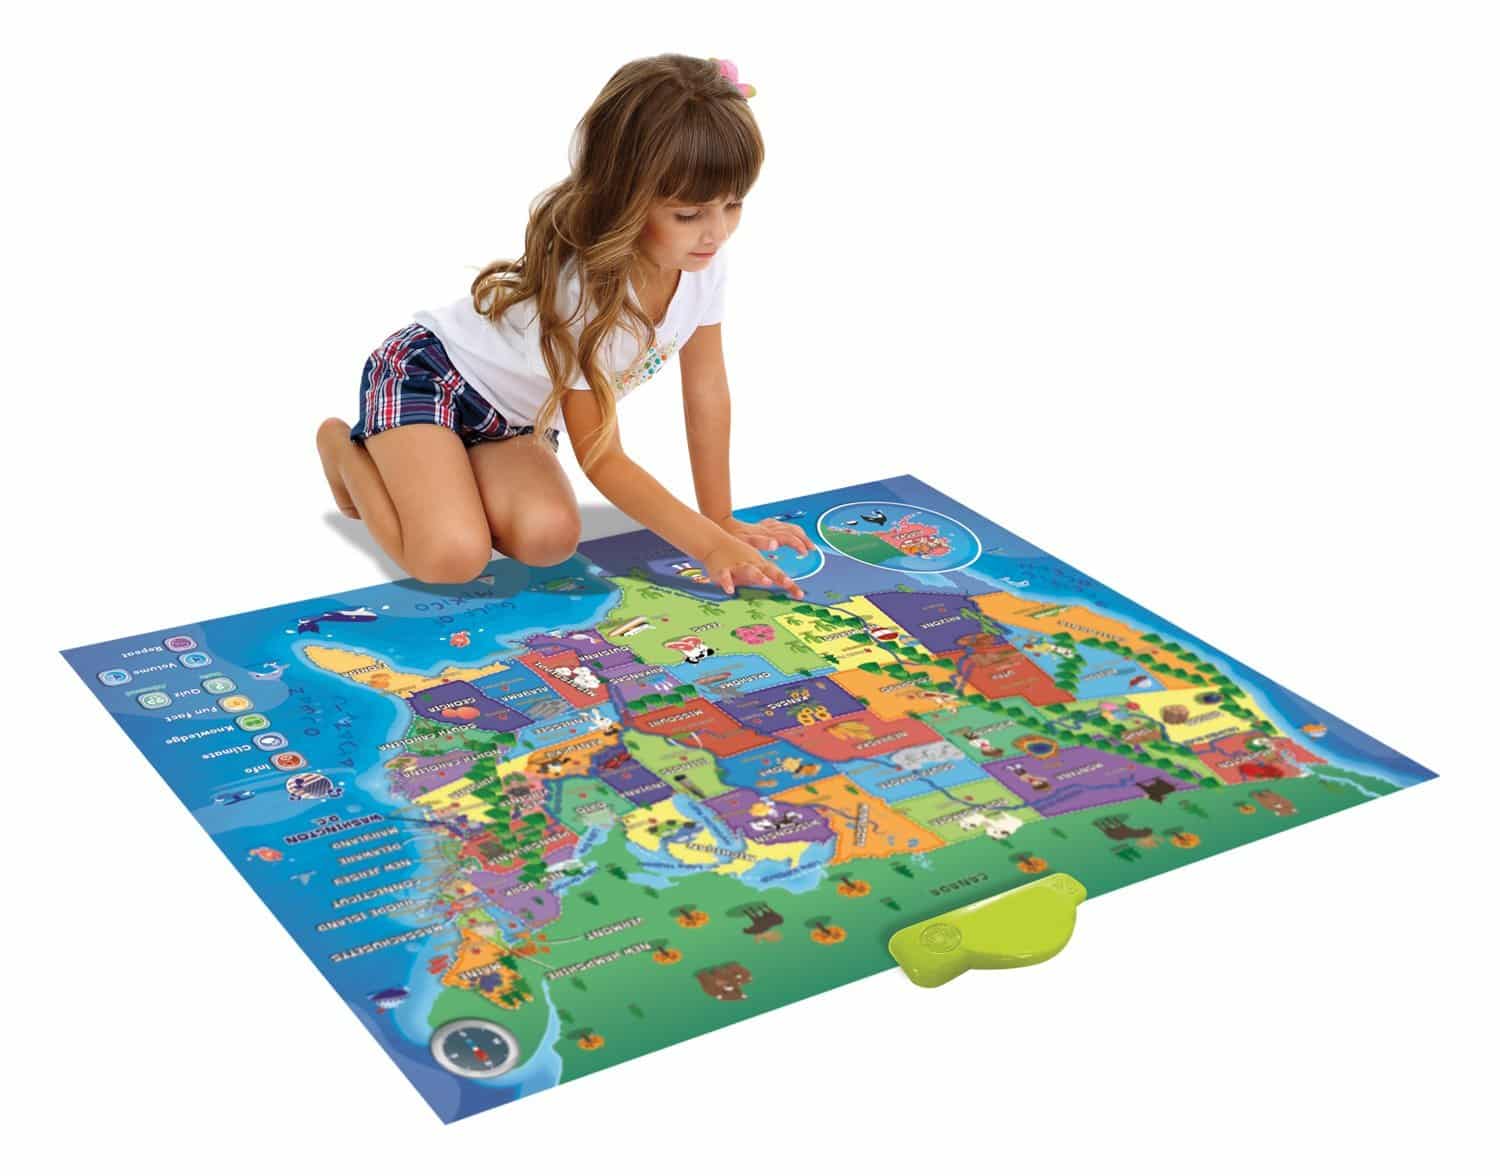 DEAL ALERT: Electronic Kids Map of the United States – 67% off